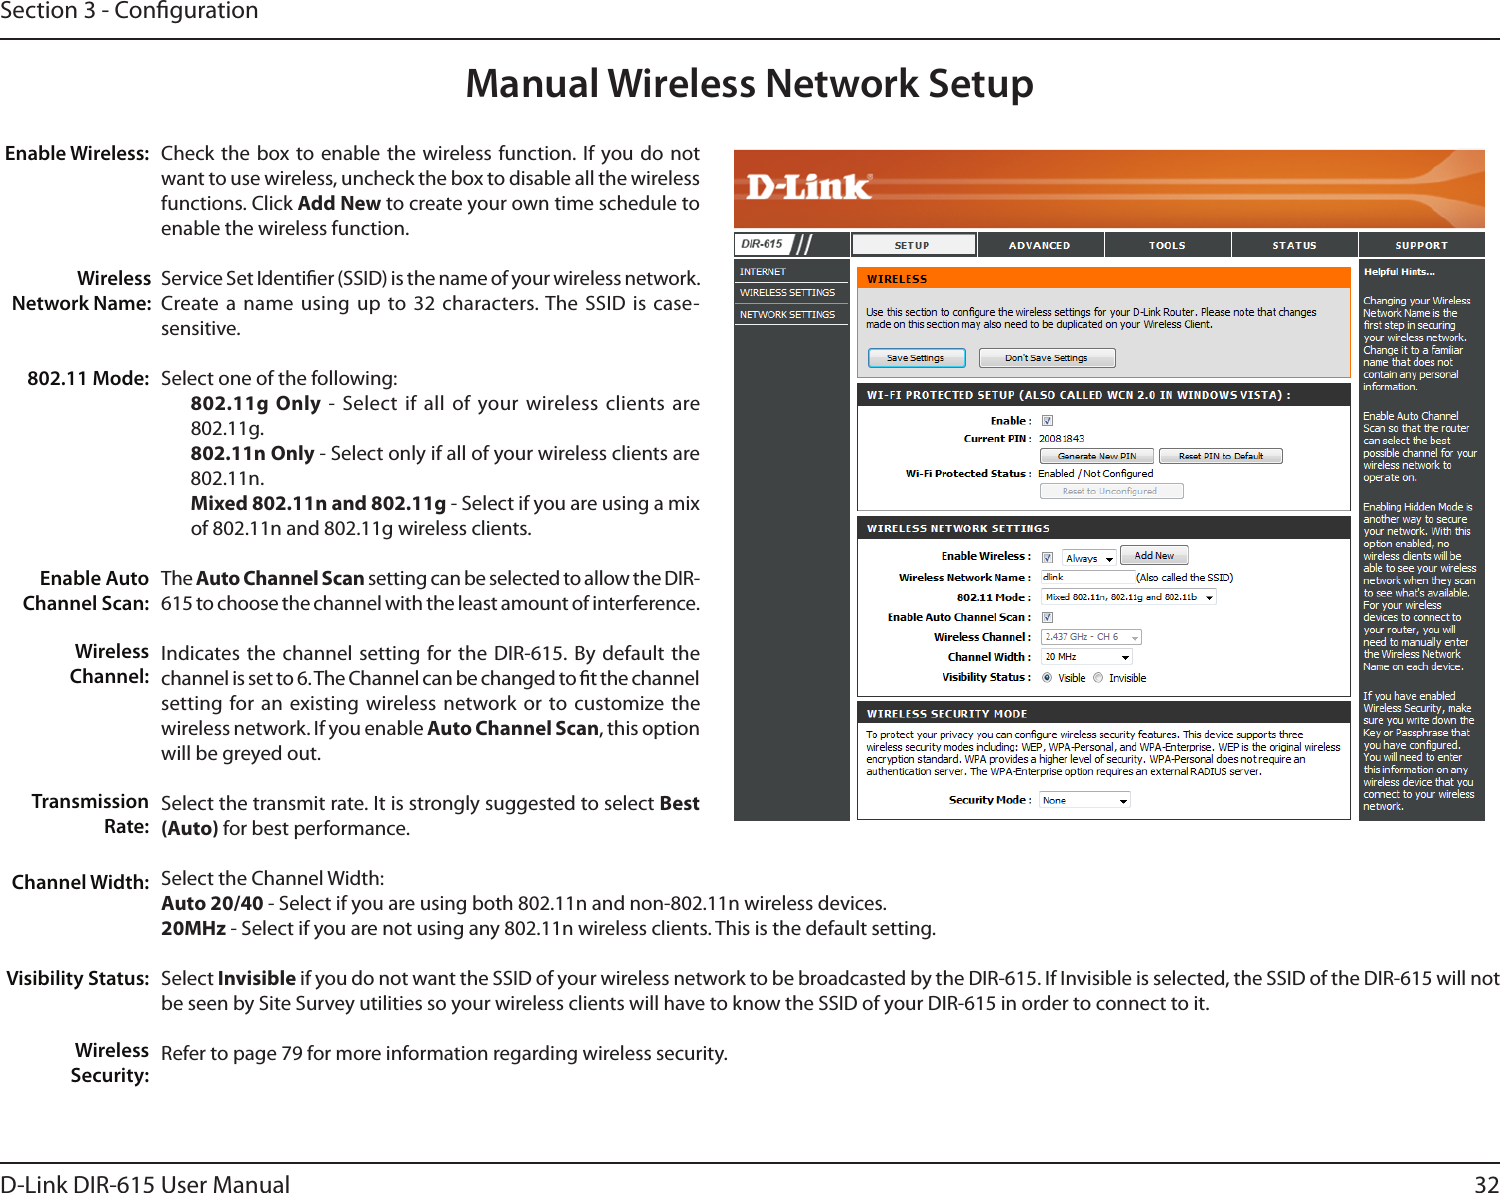 32D-Link DIR-615 User ManualSection 3 - CongurationManual Wireless Network SetupCheck the box to  enable  the  wireless function. If you do not want to use wireless, uncheck the box to disable all the wireless functions. Click Add New to create your own time schedule to enable the wireless function. Service Set Identier (SSID) is the name of your wireless network. Create a name using  up  to 32  characters. The SSID  is  case-sensitive.Select one of the following:802.11g Only -  Select if  all of your wireless clients are 802.11g.802.11n Only - Select only if all of your wireless clients are 802.11n.Mixed 802.11n and 802.11g - Select if you are using a mix of 802.11n and 802.11g wireless clients.The Auto Channel Scan setting can be selected to allow the DIR-615 to choose the channel with the least amount of interference.Indicates the channel setting for the DIR-615. By default the channel is set to 6. The Channel can be changed to t the channel setting for an  existing  wireless network  or  to  customize the wireless network. If you enable Auto Channel Scan, this option will be greyed out.Select the transmit rate. It is strongly suggested to select Best (Auto) for best performance.Select the Channel Width:Auto 20/40 - Select if you are using both 802.11n and non-802.11n wireless devices.20MHz - Select if you are not using any 802.11n wireless clients. This is the default setting. Select Invisible if you do not want the SSID of your wireless network to be broadcasted by the DIR-615. If Invisible is selected, the SSID of the DIR-615 will not be seen by Site Survey utilities so your wireless clients will have to know the SSID of your DIR-615 in order to connect to it.Refer to page 79 for more information regarding wireless security.Enable Wireless:Wireless Network Name:802.11 Mode:Enable Auto Channel Scan:Wireless Channel:Transmission Rate:Channel Width:Visibility Status:Wireless Security: